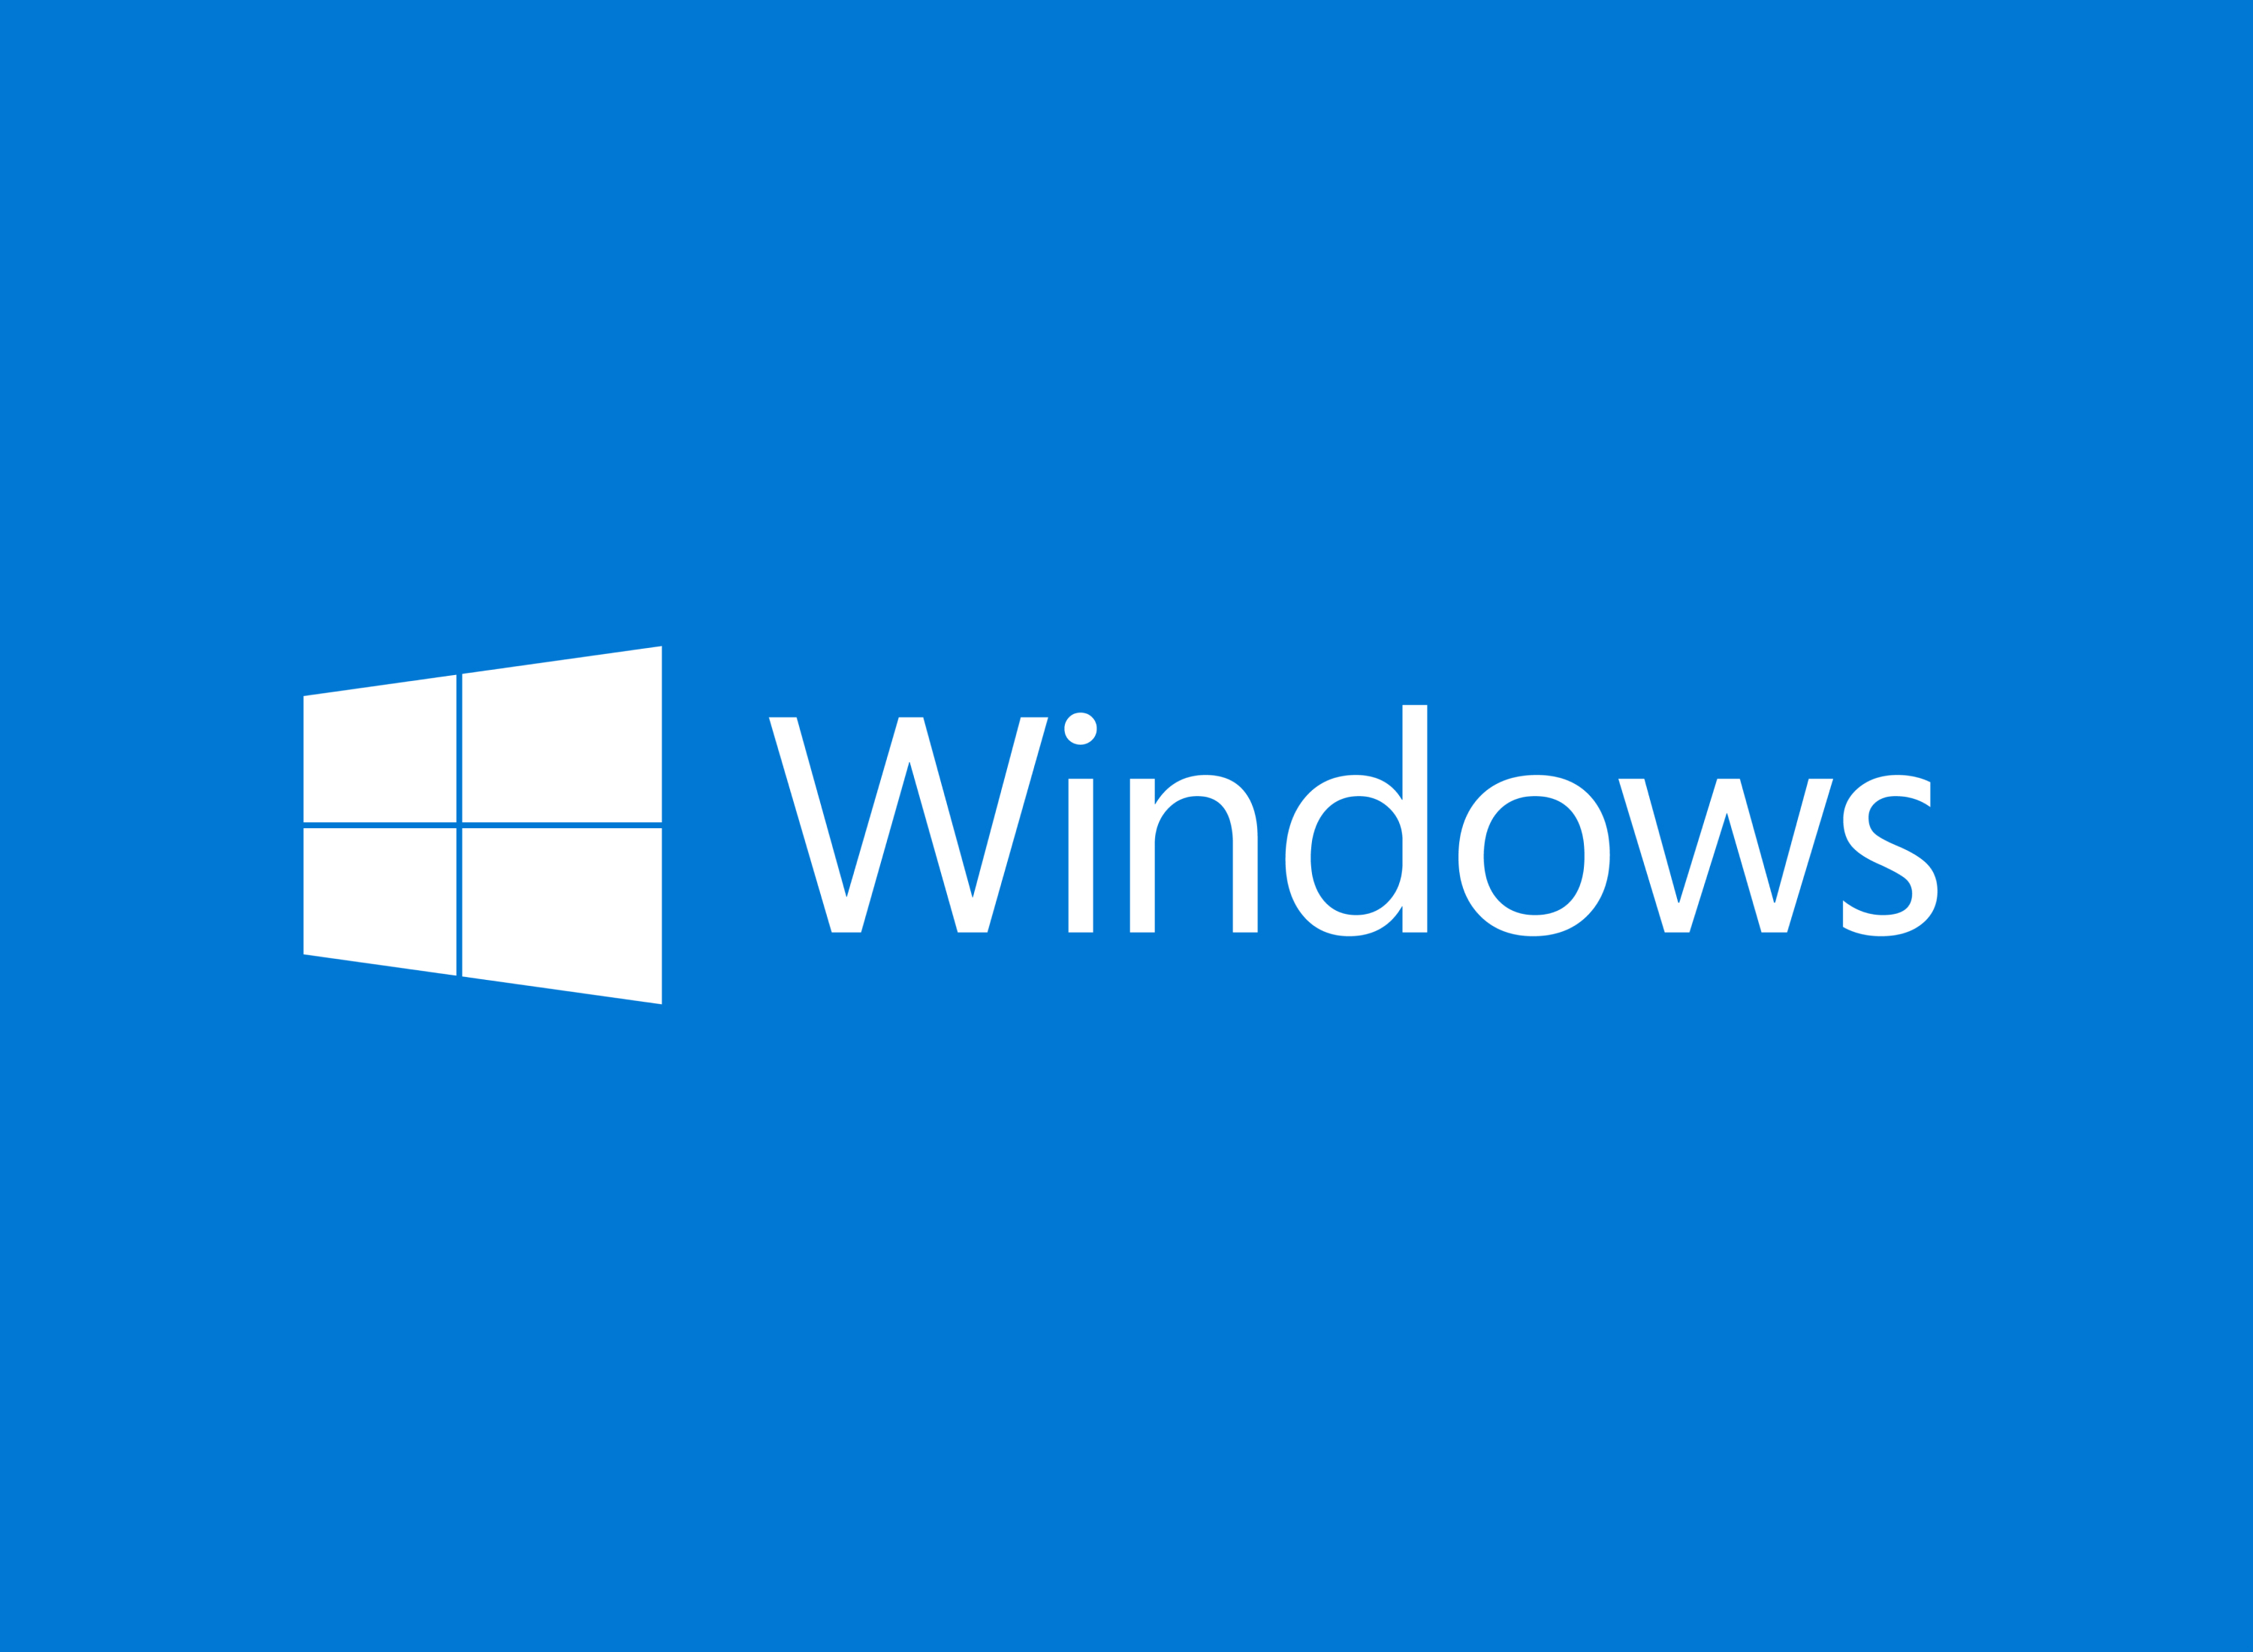 Announcing Windows 10 Insider Preview Build 21296